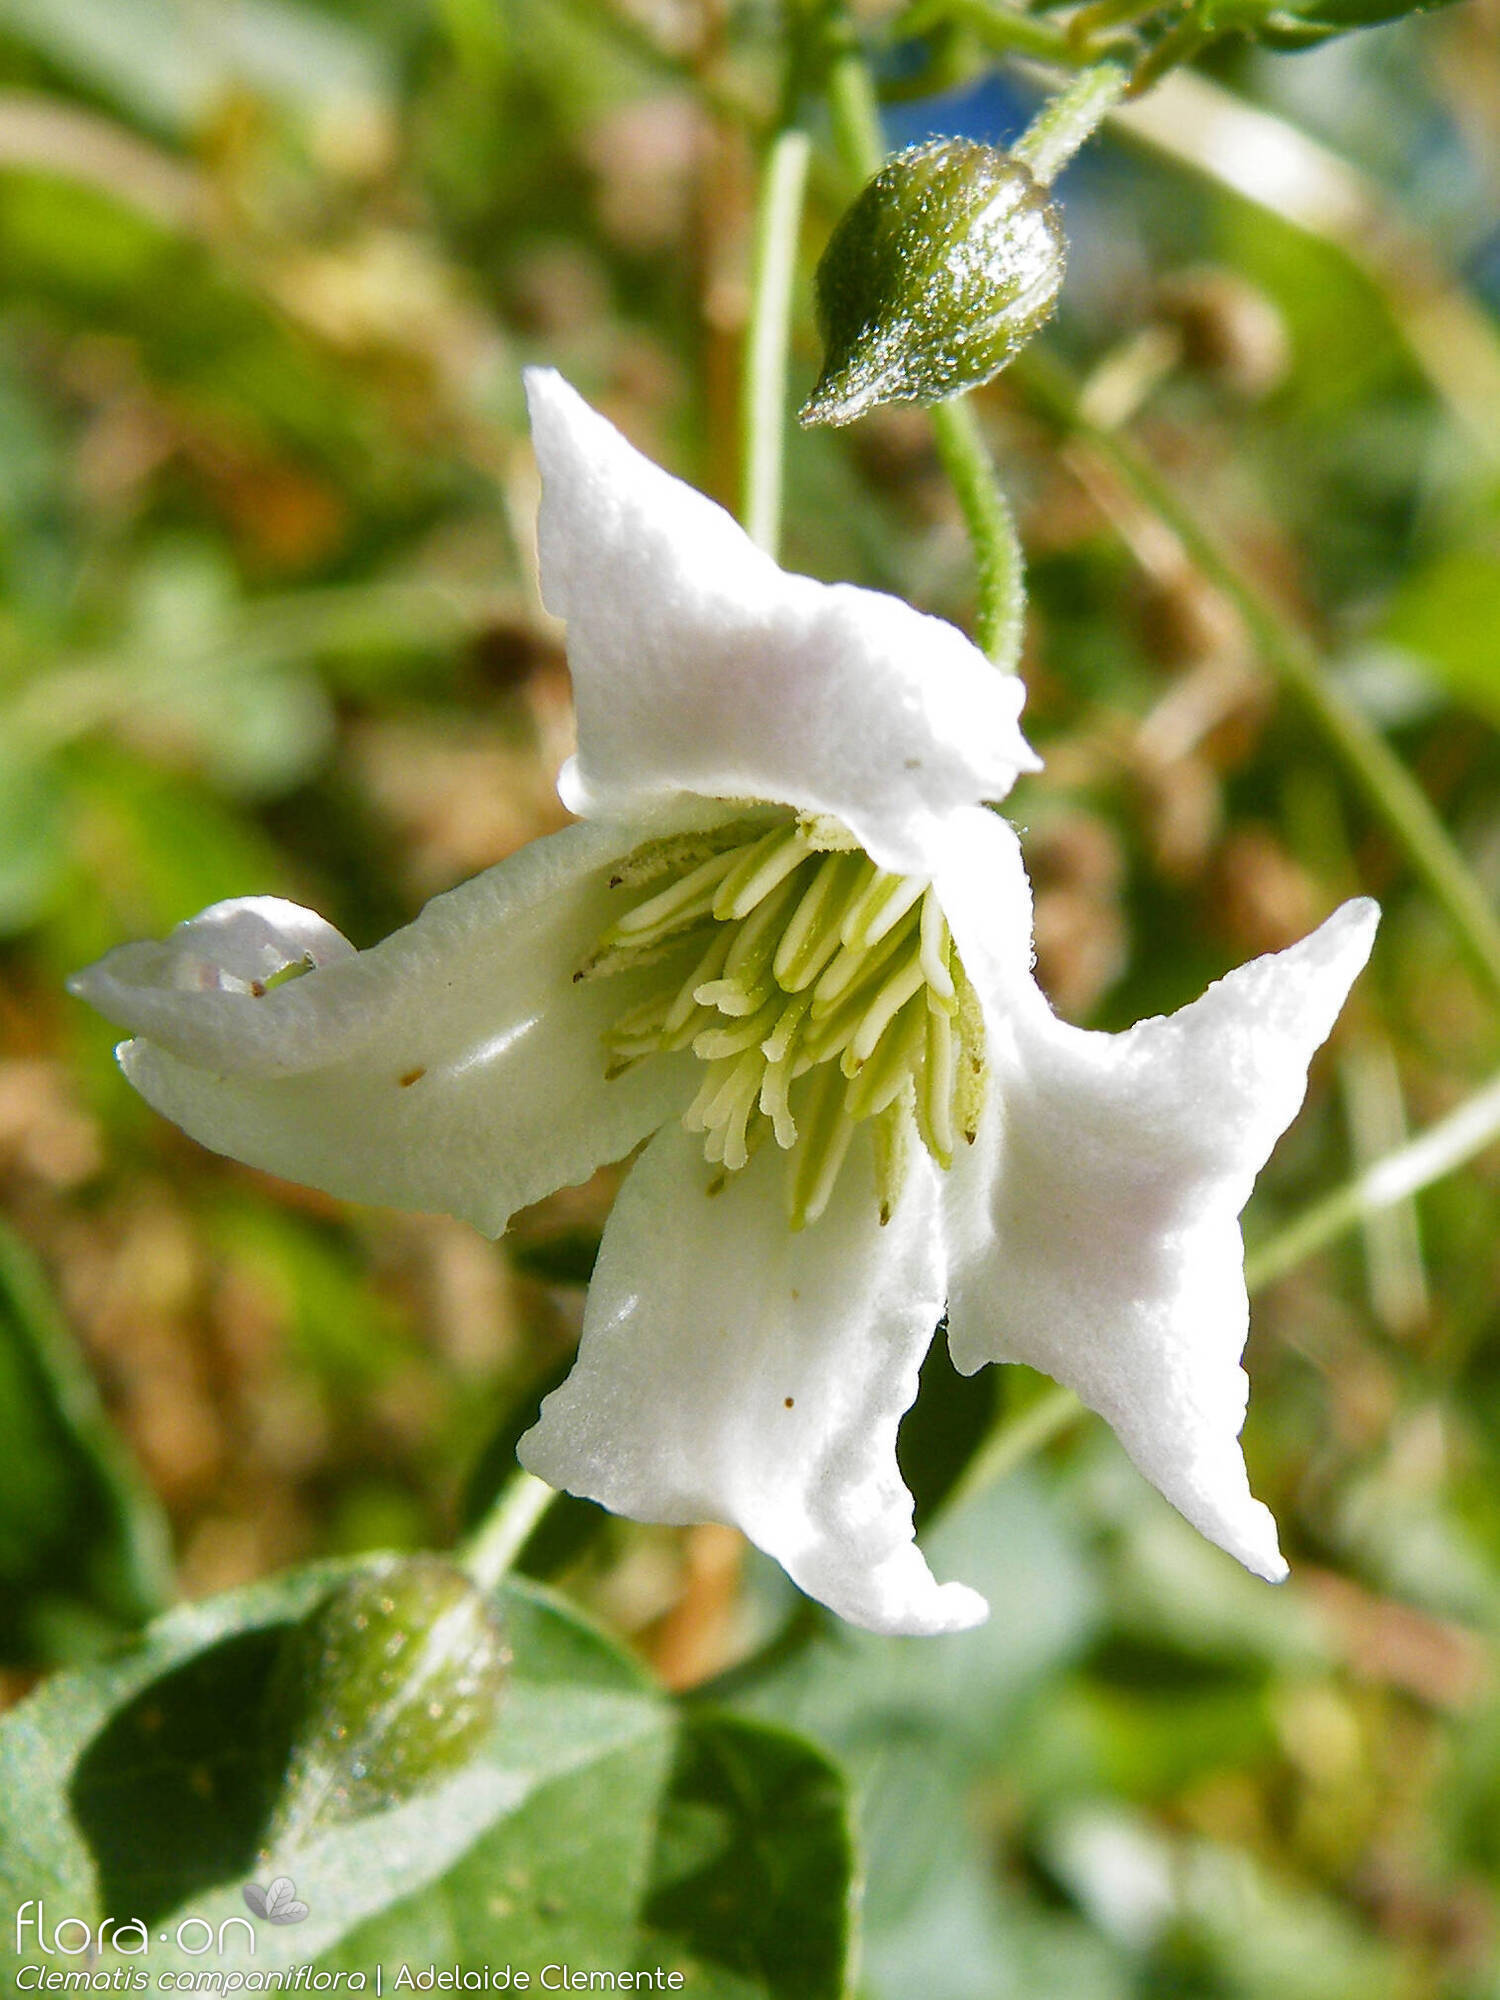 Clematis campaniflora - Flor (close-up) | Adelaide Clemente; CC BY-NC 4.0